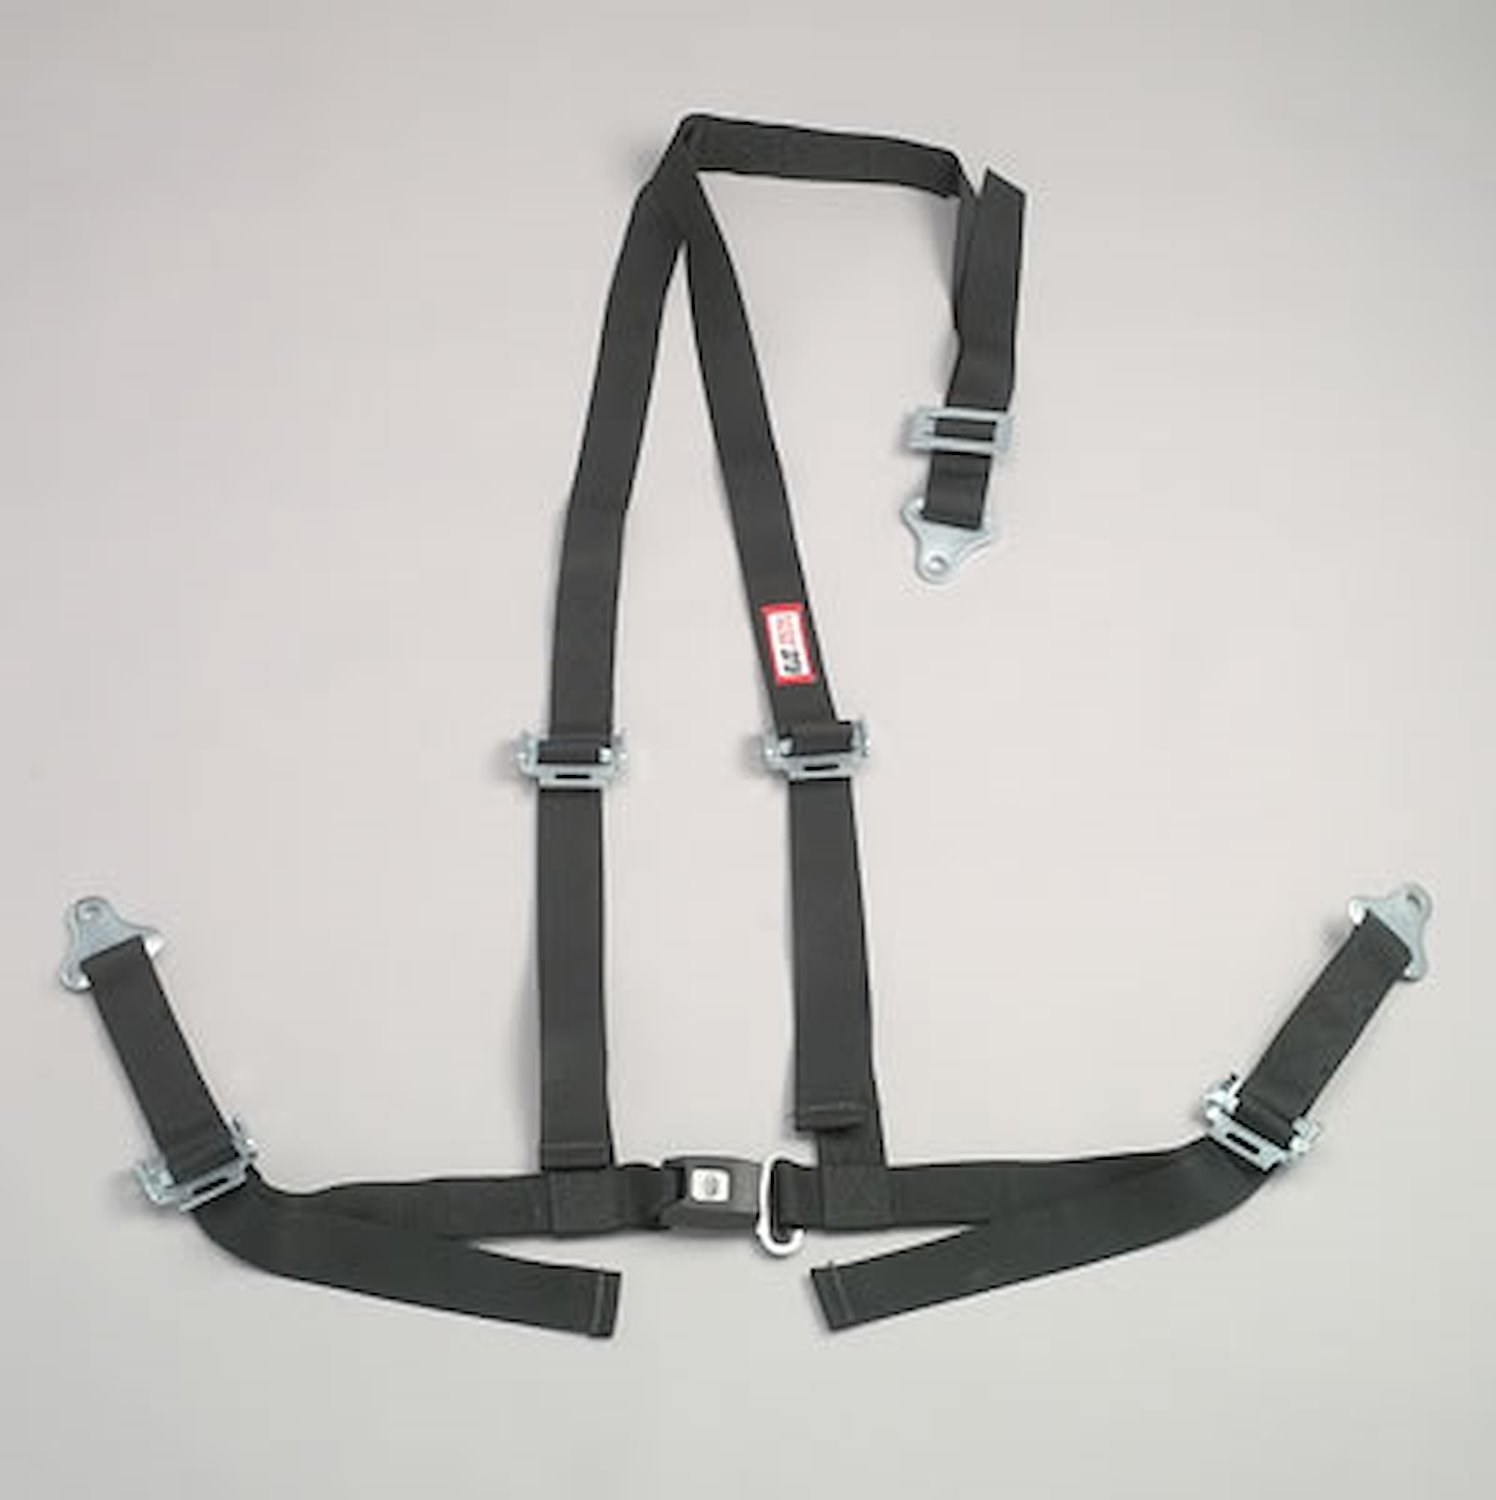 NON-SFI B&T HARNESS 2 PULL UP Lap Belt SNAP 2 S. H. Individual FLOOR Mount WRAP/BOLT w/STERNUM STRAP YELLOW